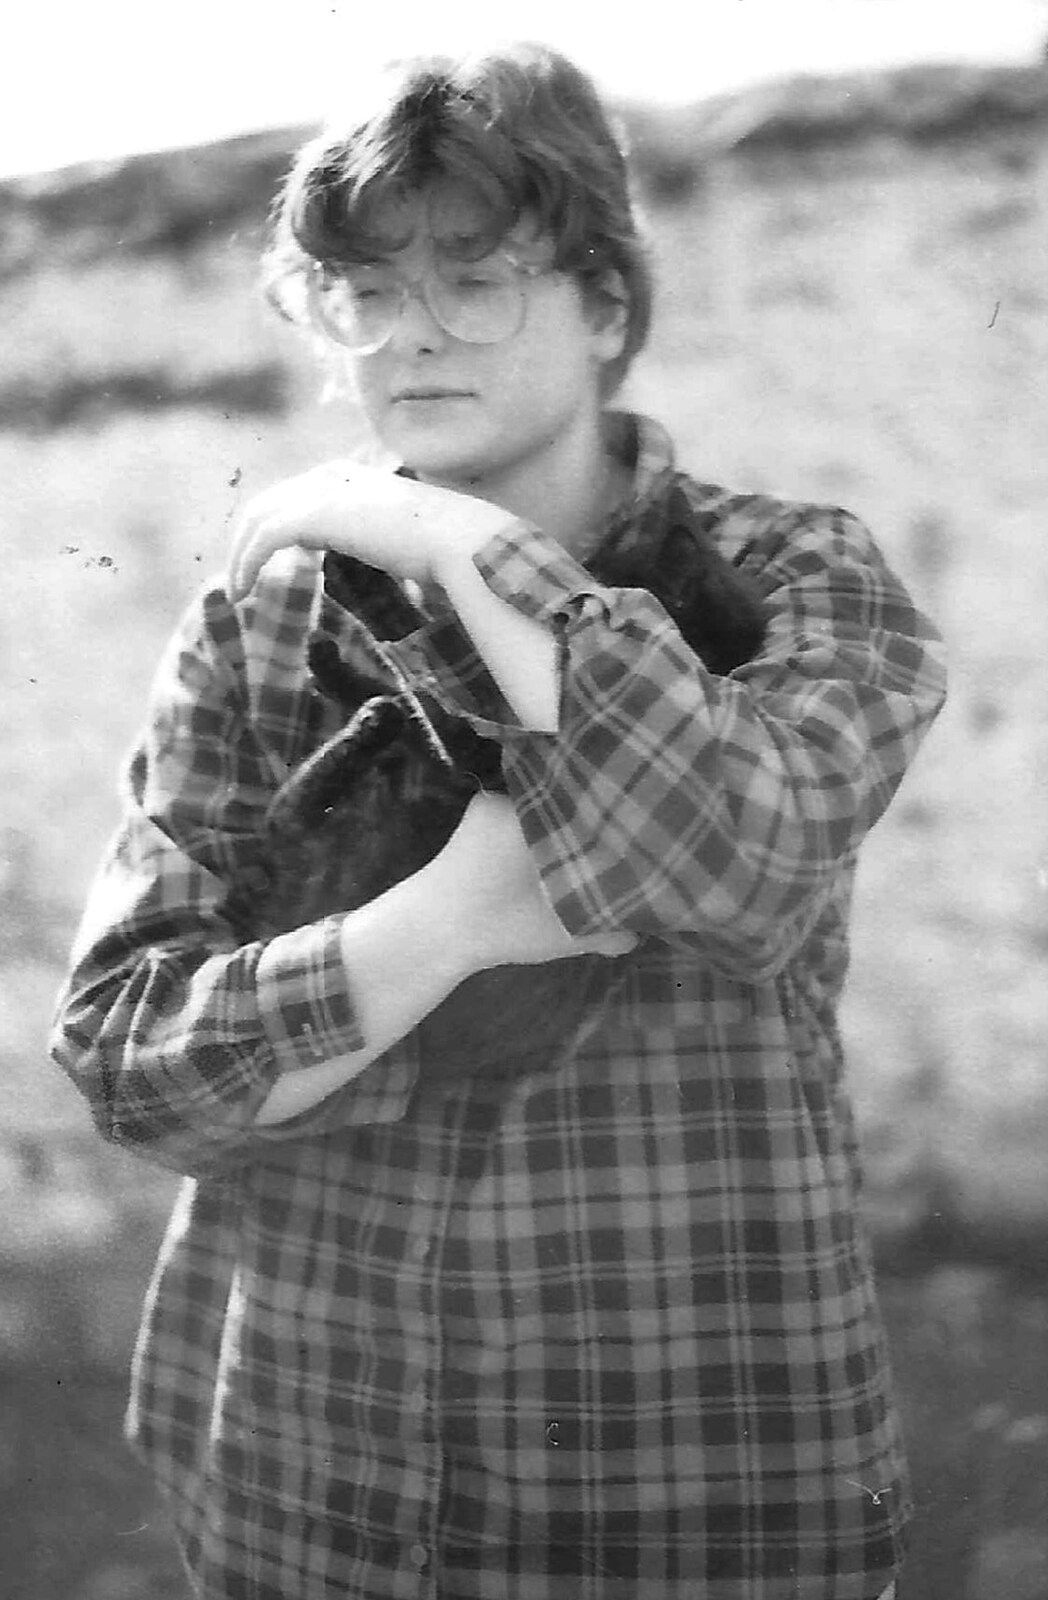 Barbara plays with the kitten from Uni: A Neath Road Summer, St. Jude's, Plymouth - 18th August 1987